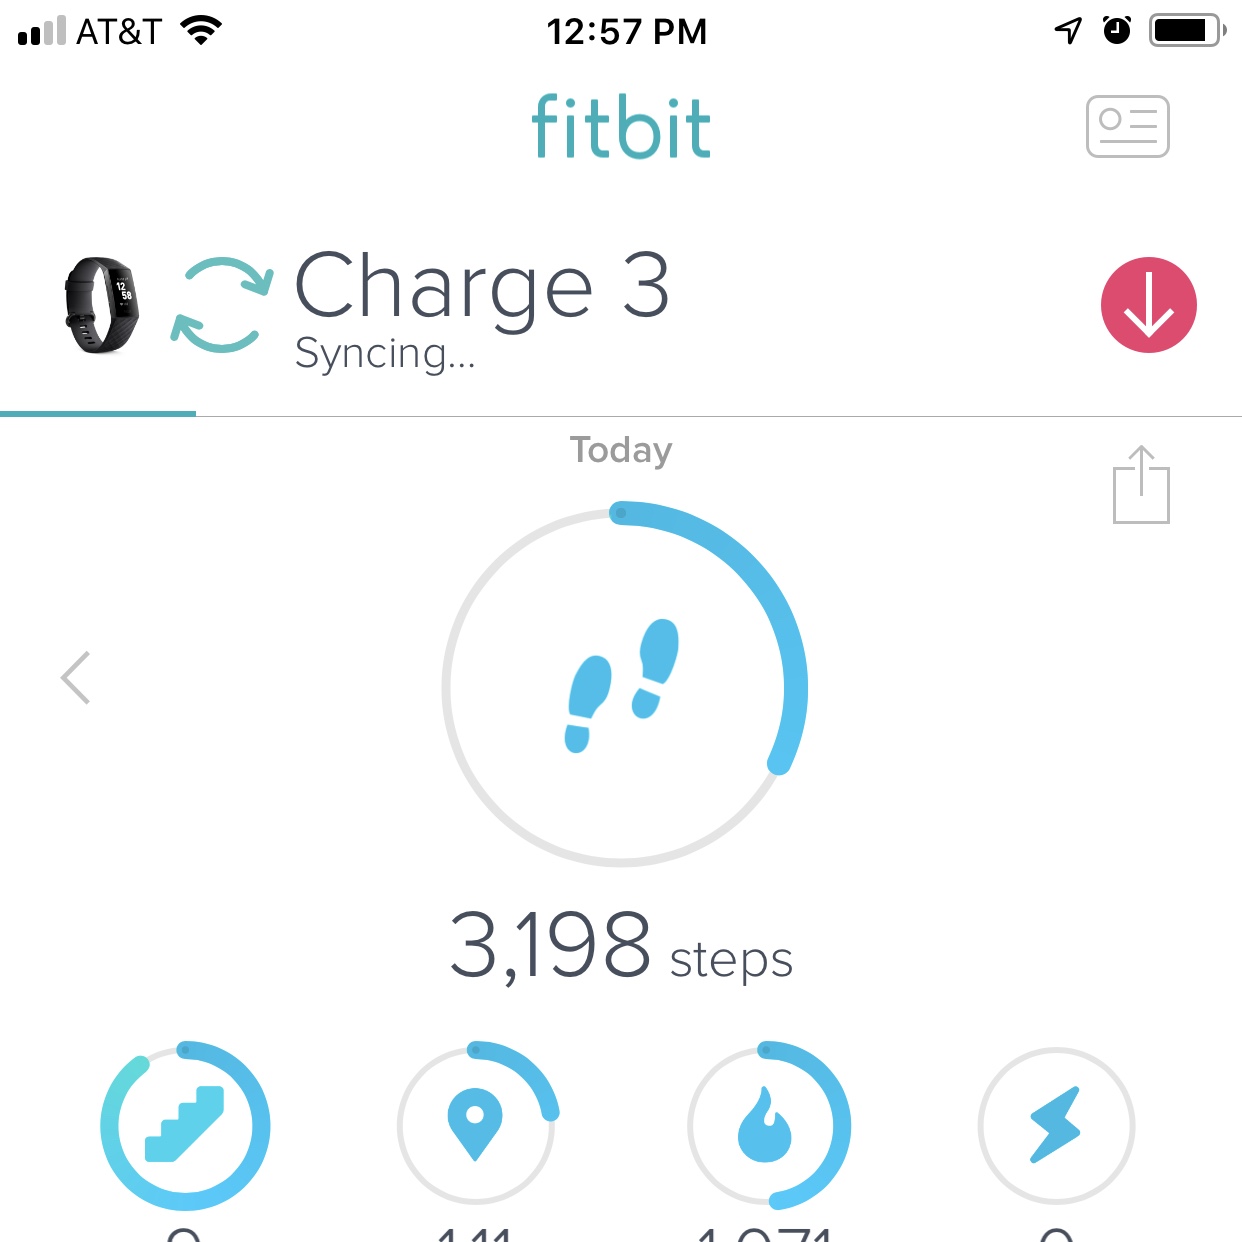 pair fitbit charge 3 with new iphone